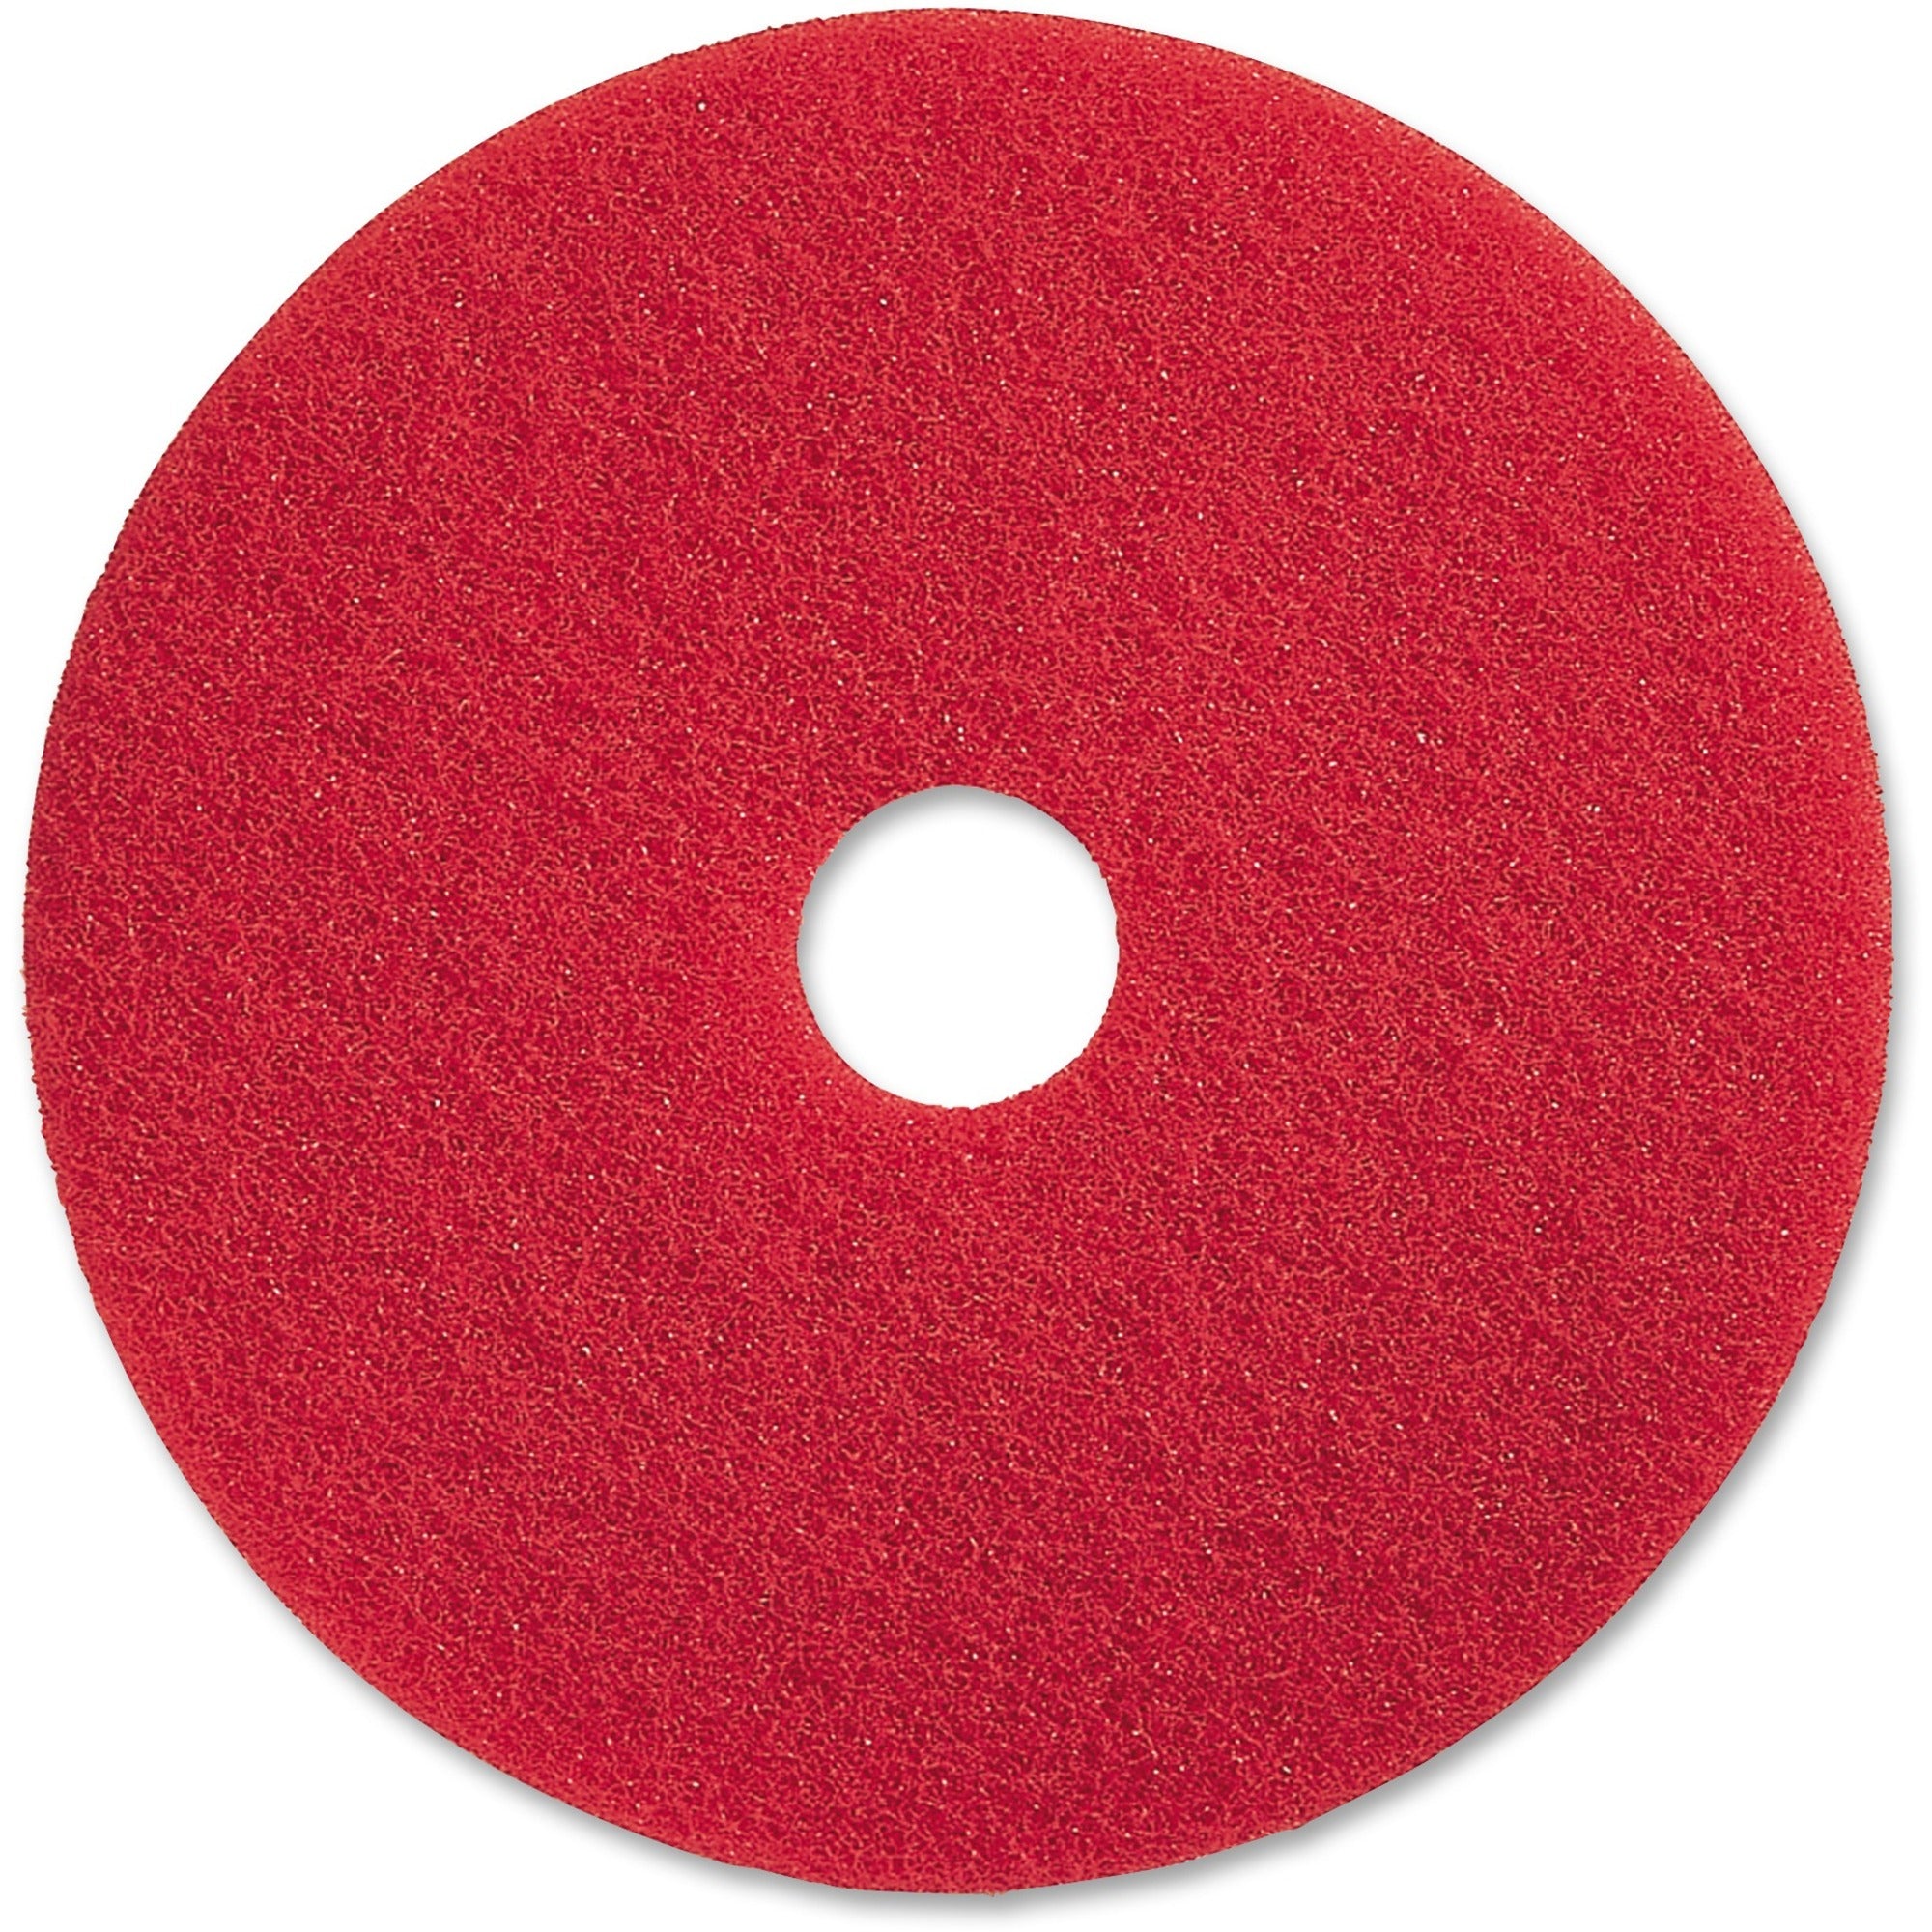 Genuine Joe Red Buffing Floor Pad - 19" Diameter - 5/Carton x 19" Diameter x 1" Thickness - Buffing, Scrubbing, Floor - 175 rpm to 350 rpm Speed Supported - Flexible, Resilient, Rotate, Dirt Remover - Fiber - Red - 